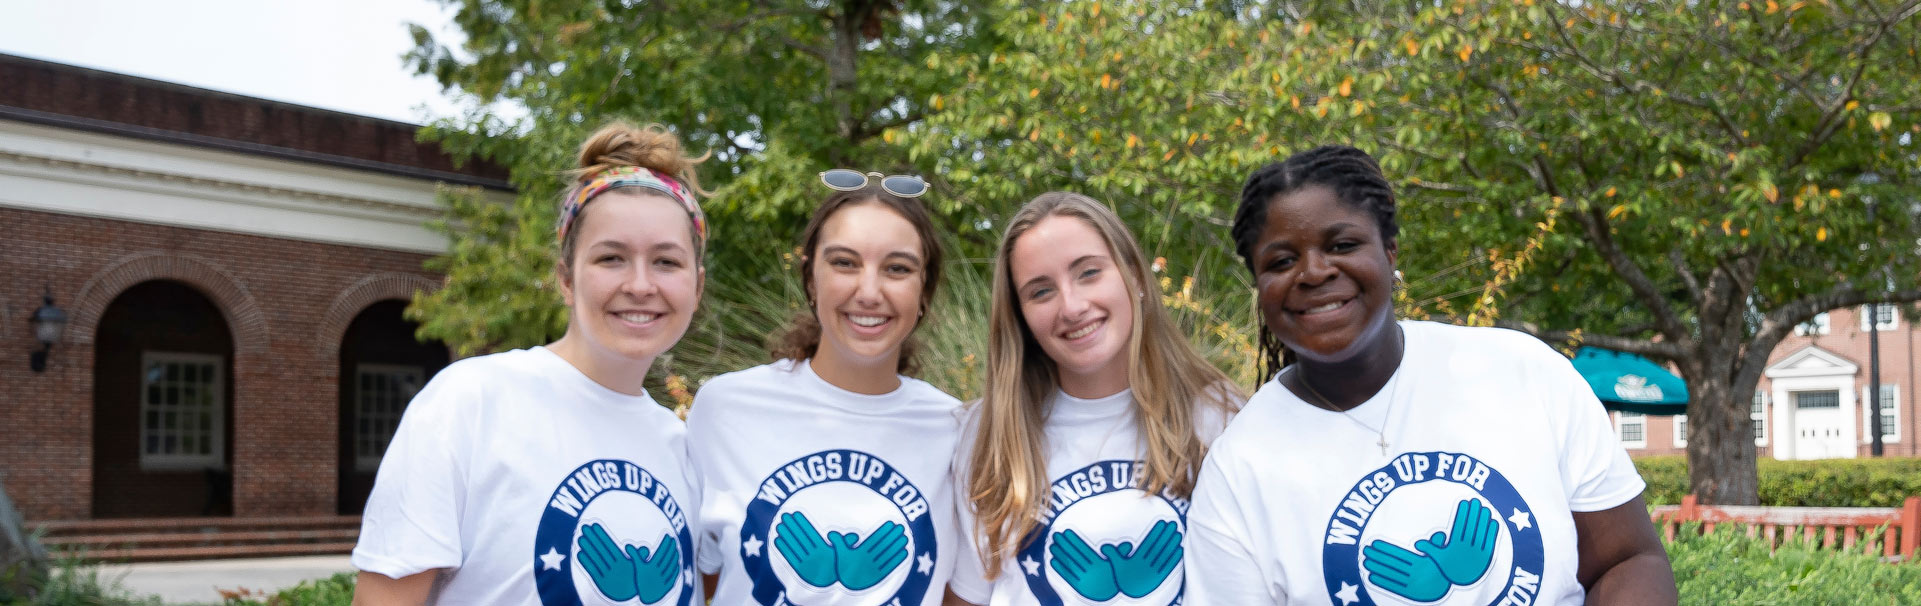 Four students with Wings up for Wilmington shirts